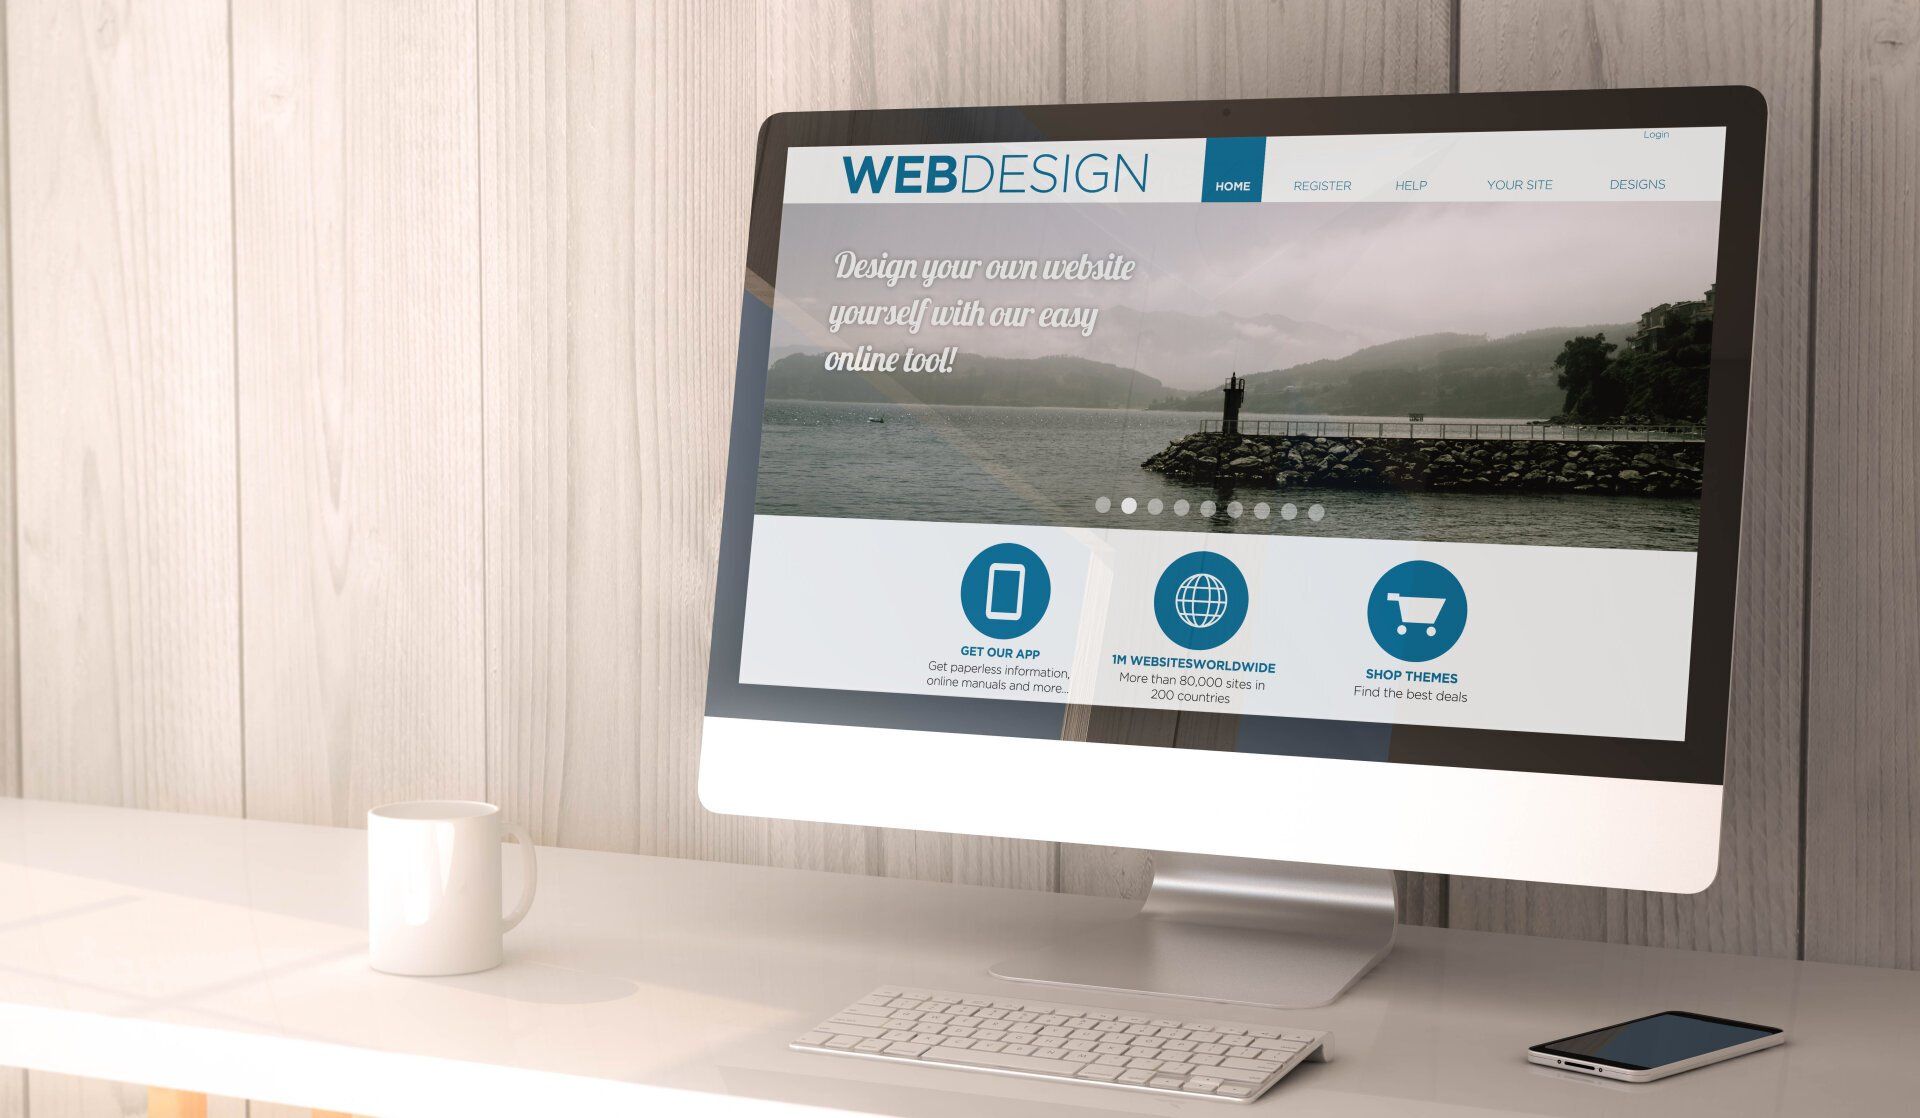 Appealing and innovative website design helps you get an edge over your competitors and connect your target audiences across the world.